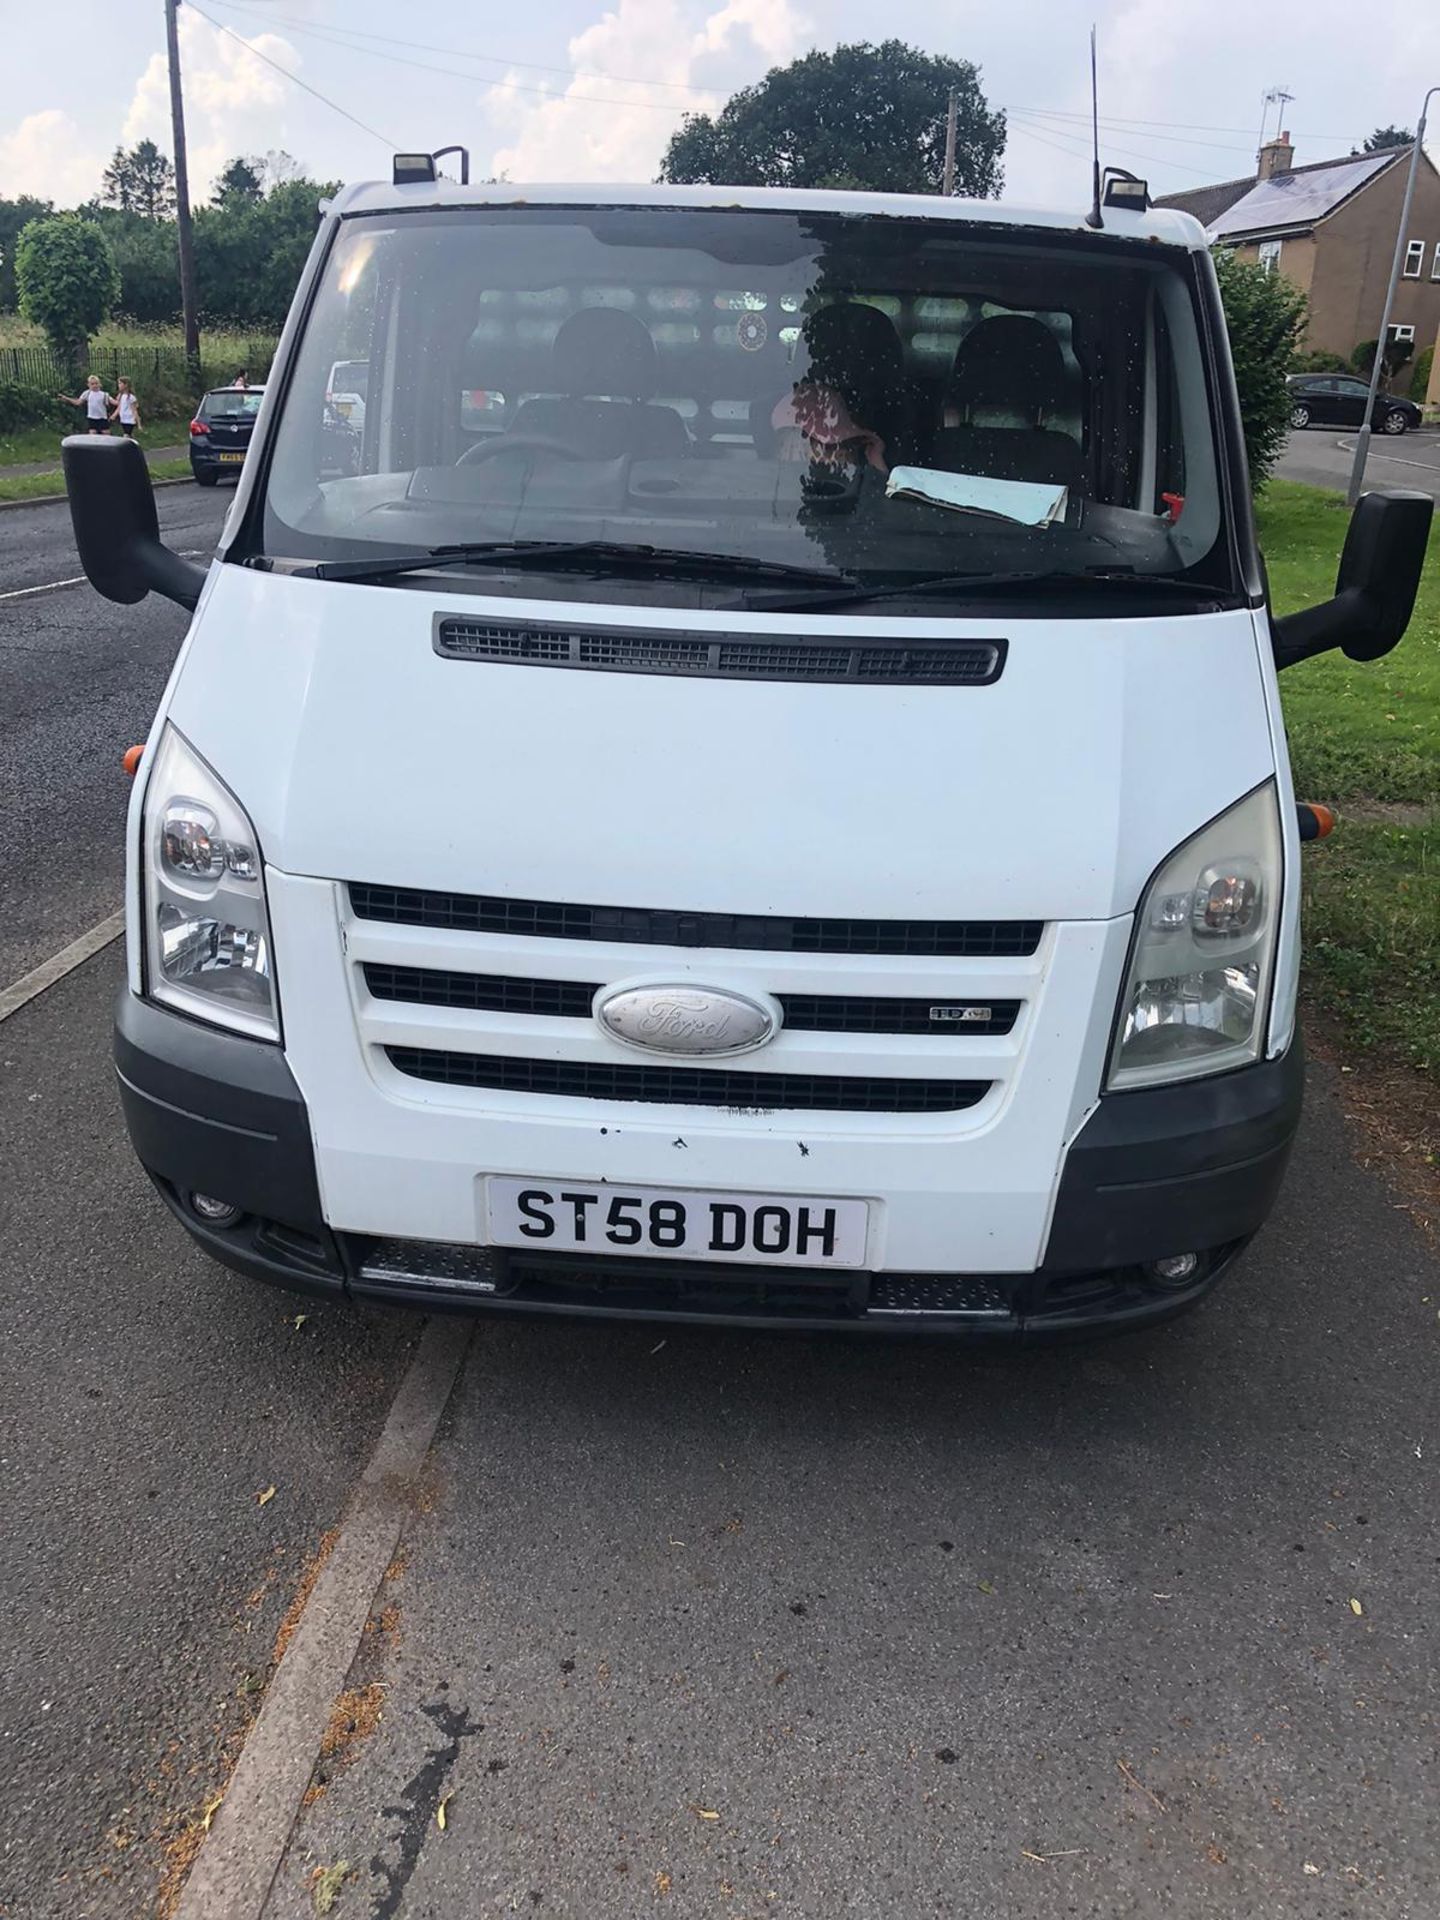 2008 FORD TRANSIT 100 T350L RWD WHITE DROPSIDE LORRY, 228,407 MILES, 2.4 DIESEL *NO VAT* - Image 2 of 9